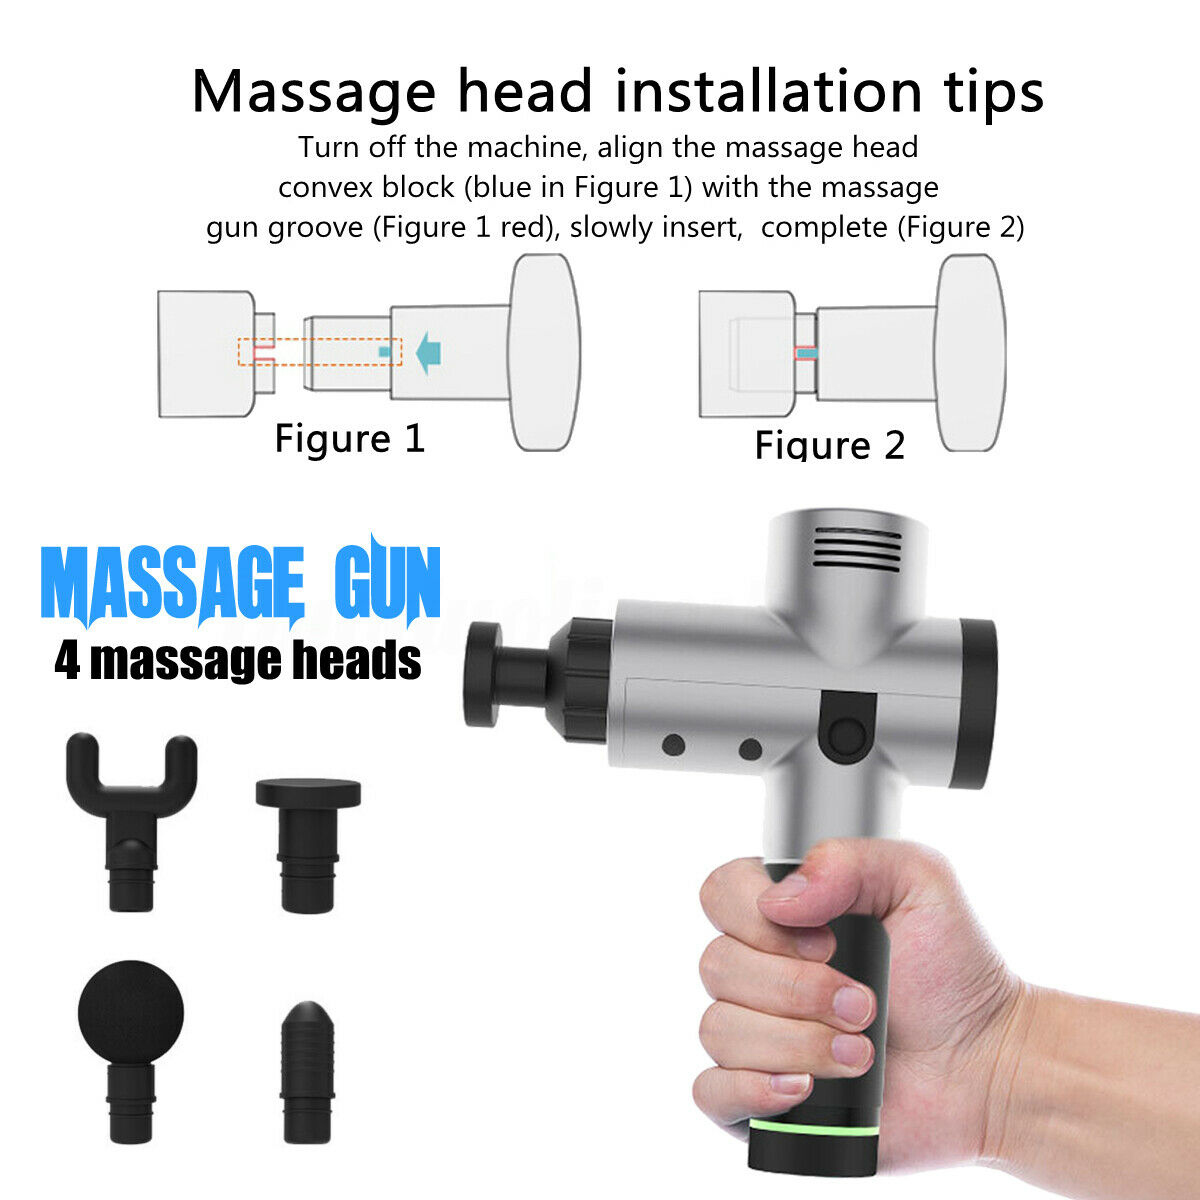 2400-mAh-Percussion-Massage-Deep-Tissue-Electric-Massager-Cordless-Massag-Device-for-Body-Pain-Relie-1536268-4